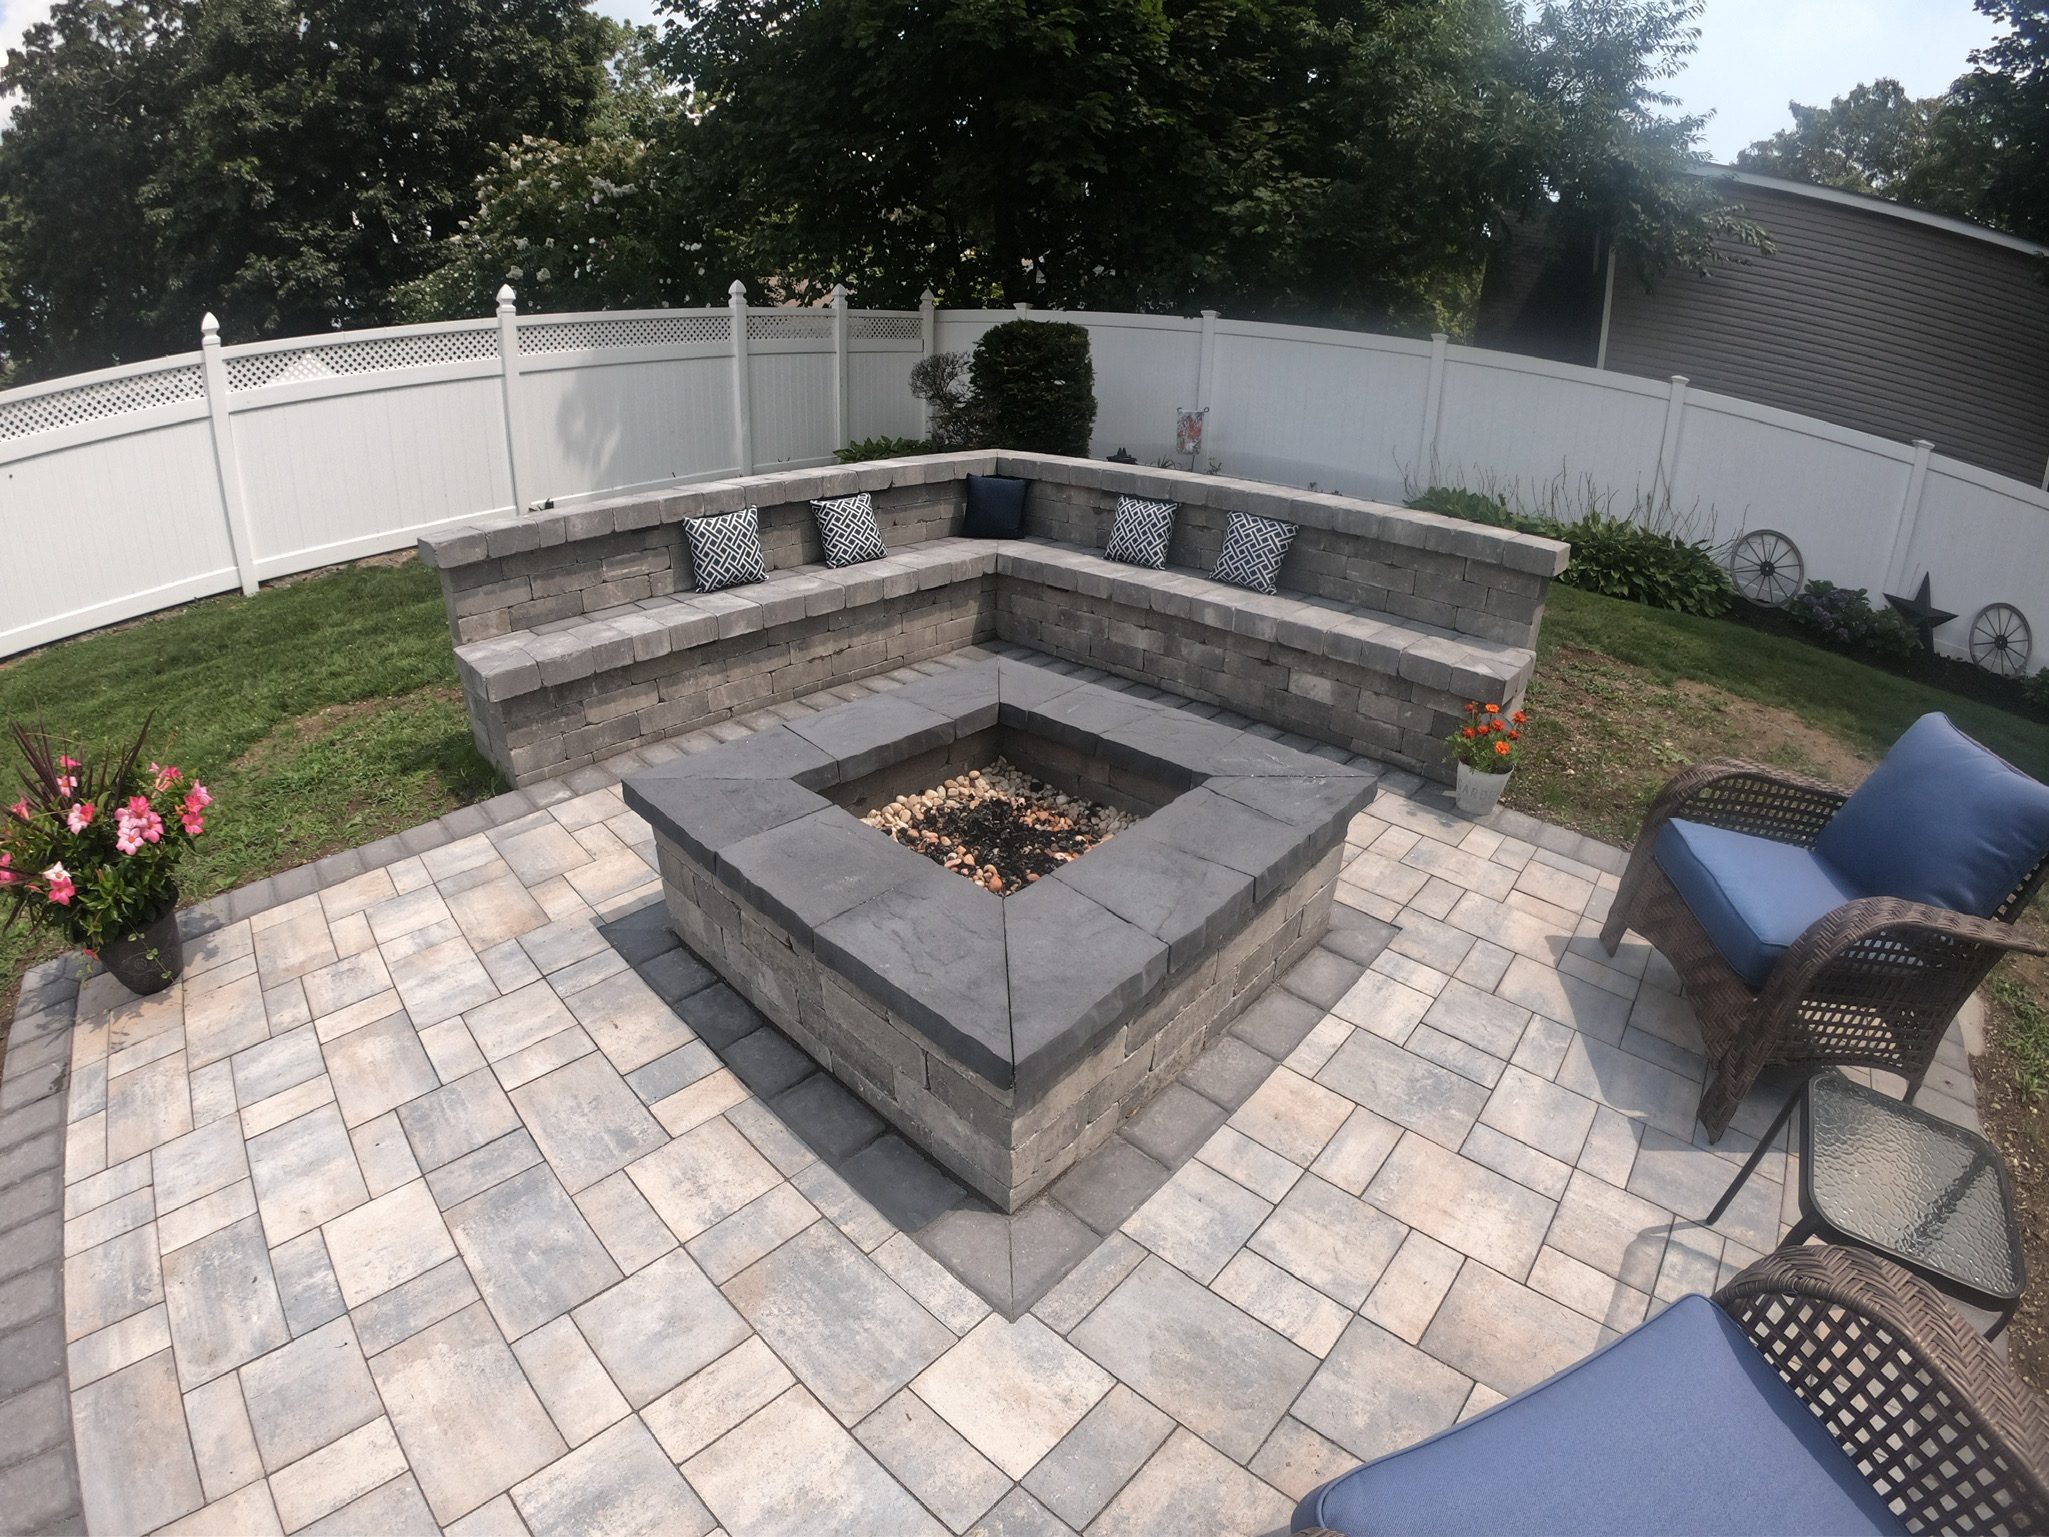 stone fire pit and paver patio area, outdoor living Long Island